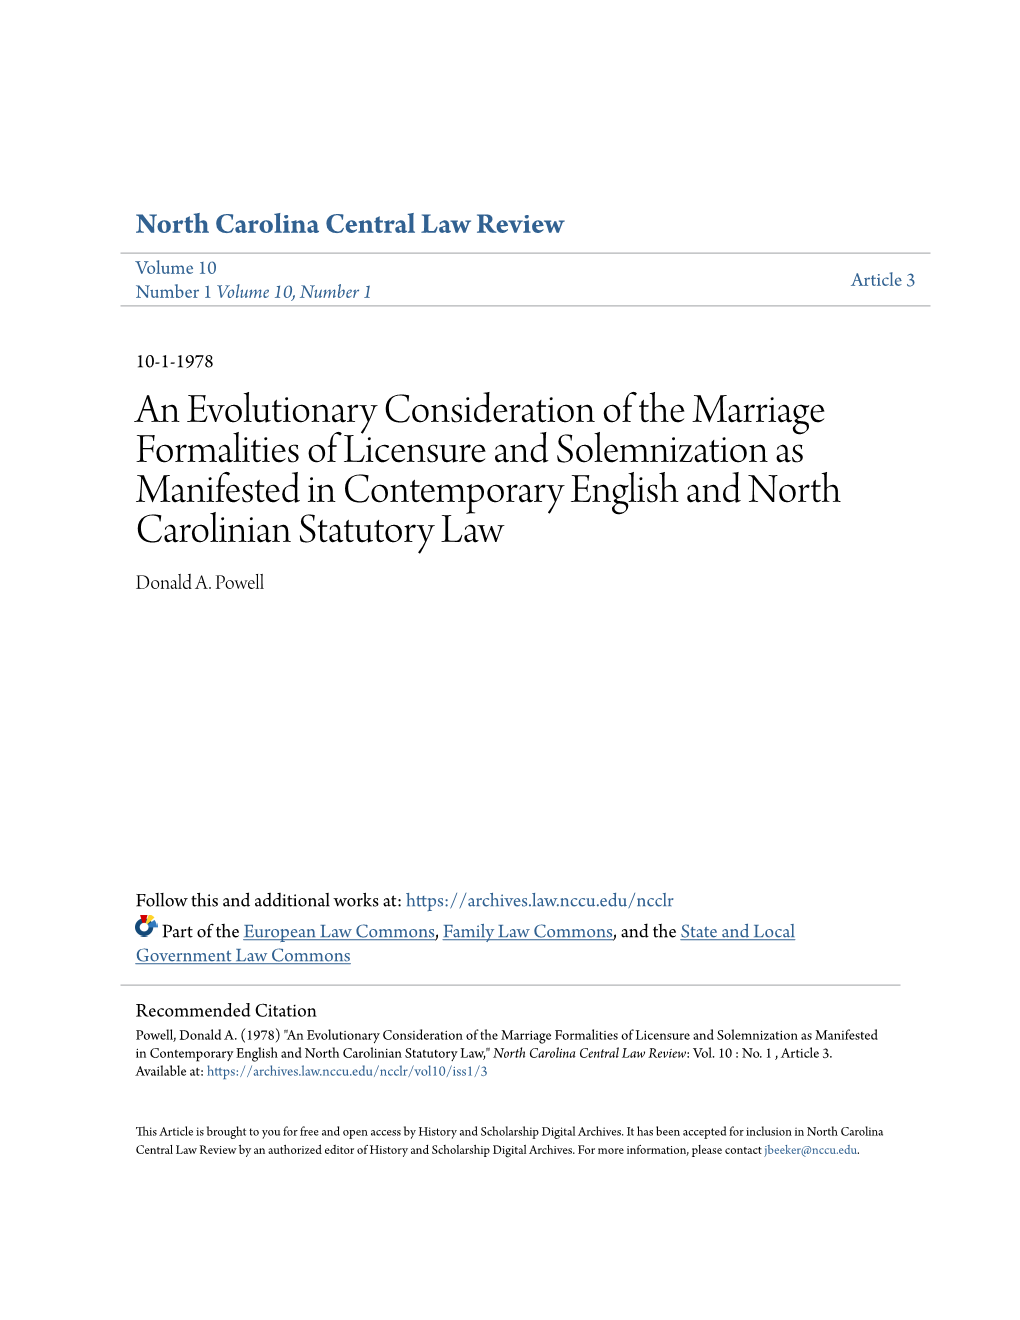 An Evolutionary Consideration of the Marriage Formalities of Licensure and Solemnization As Manifested in Contemporary English A